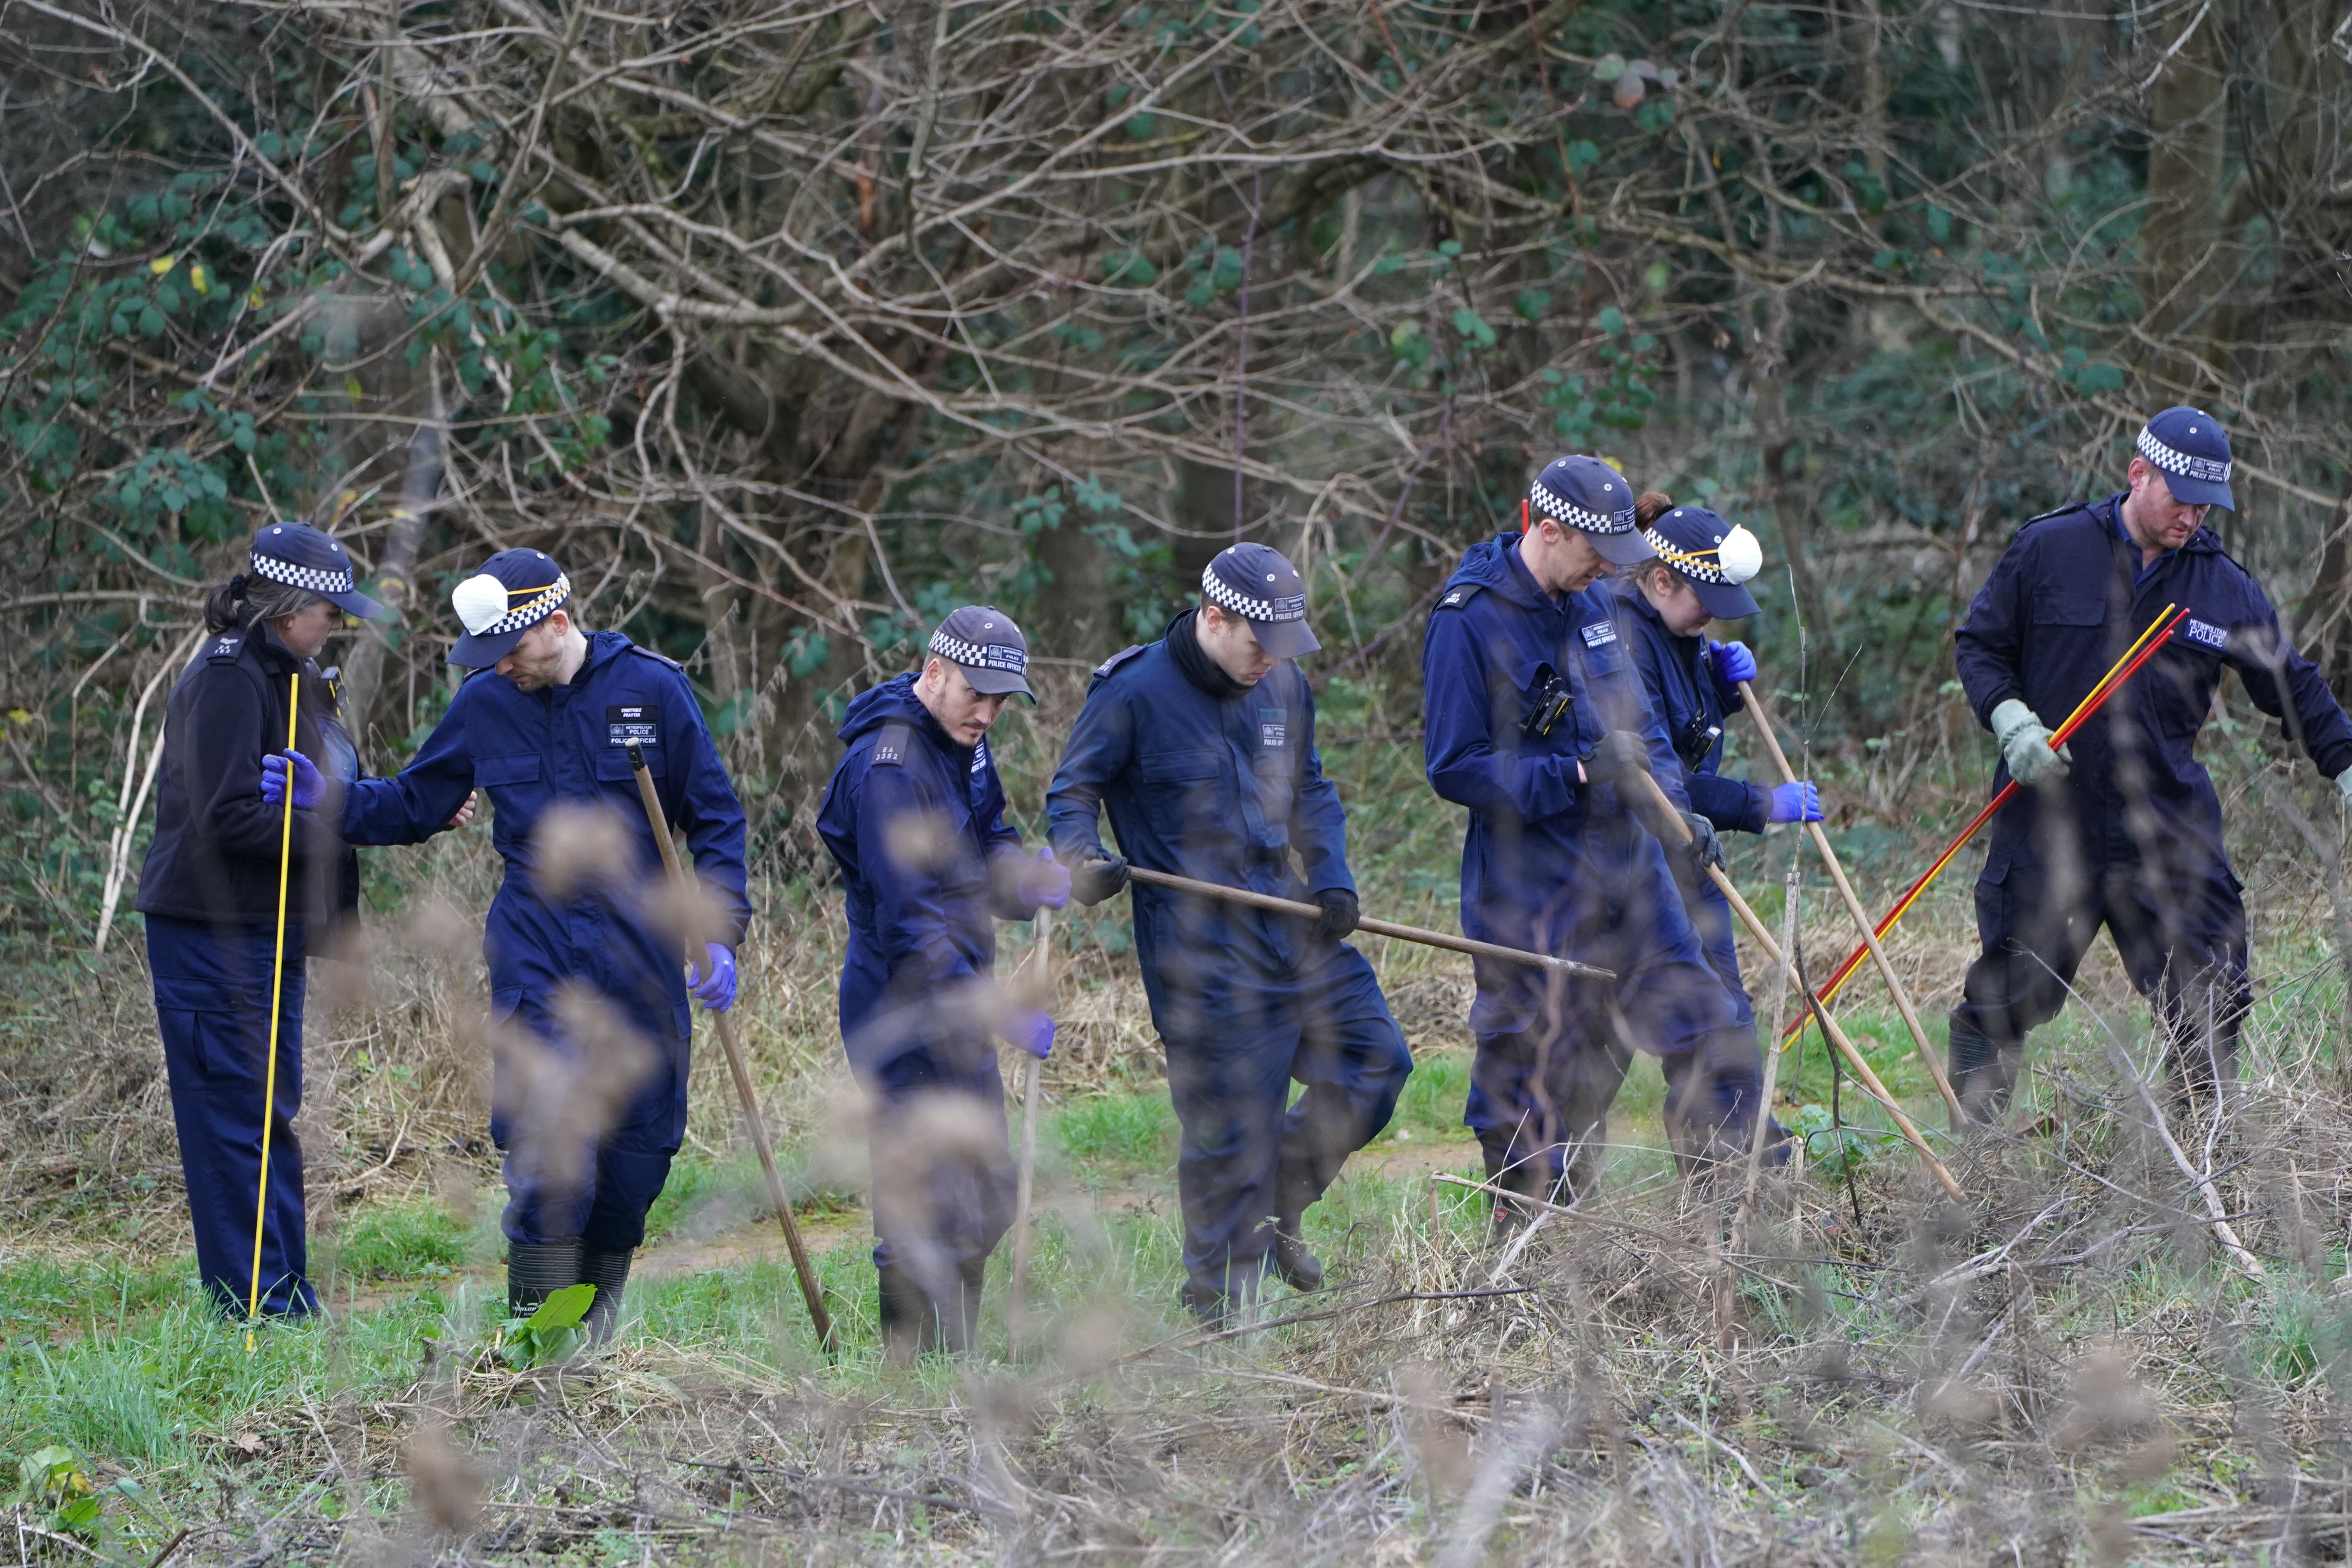 Police activity at Philpot’s Farm open space in Yiewsley, west London, after a 16-year-old boy was stabbed to death (Kirsty O’Connor/PA)